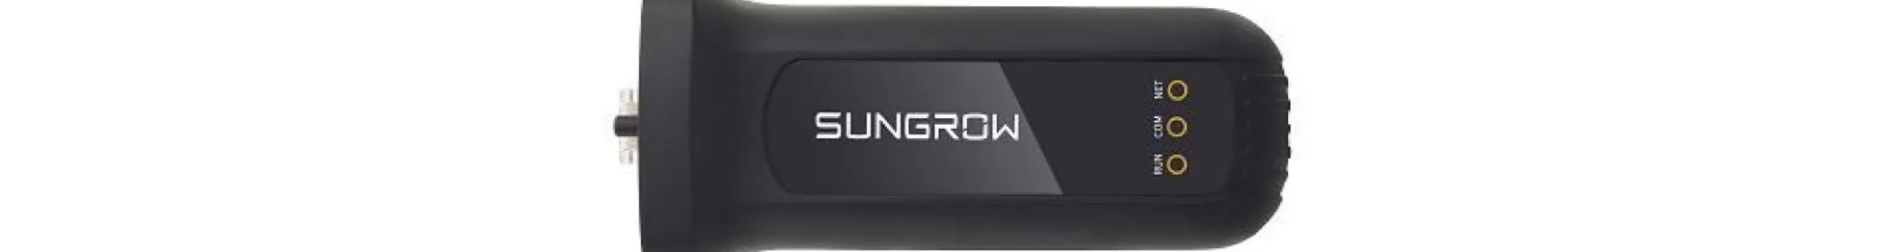 Sungrow WLAN Dongle: Initial Wi-Fi Setup / Connection / Reconnection Guide